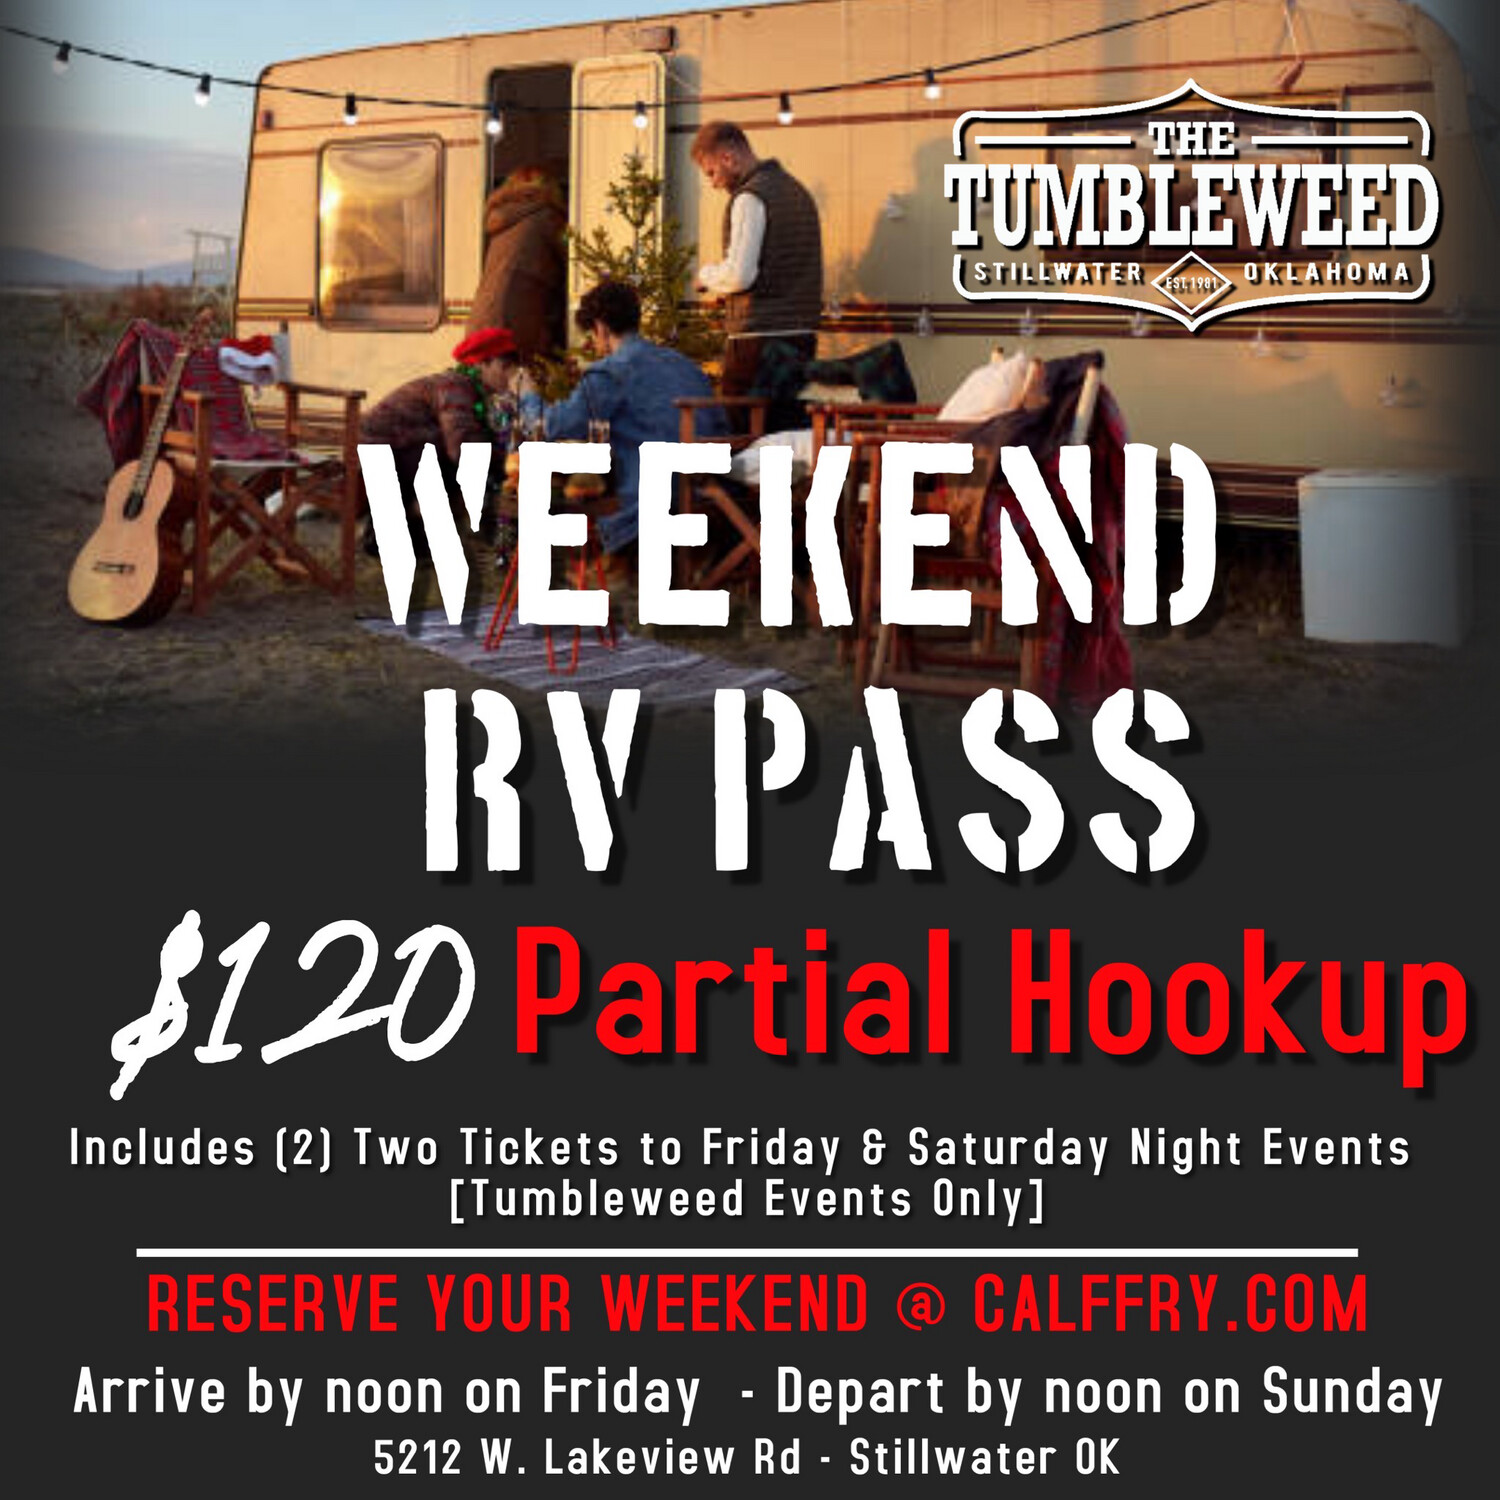 Weekend RV Pass / January 27-28 (Partial Hookup)